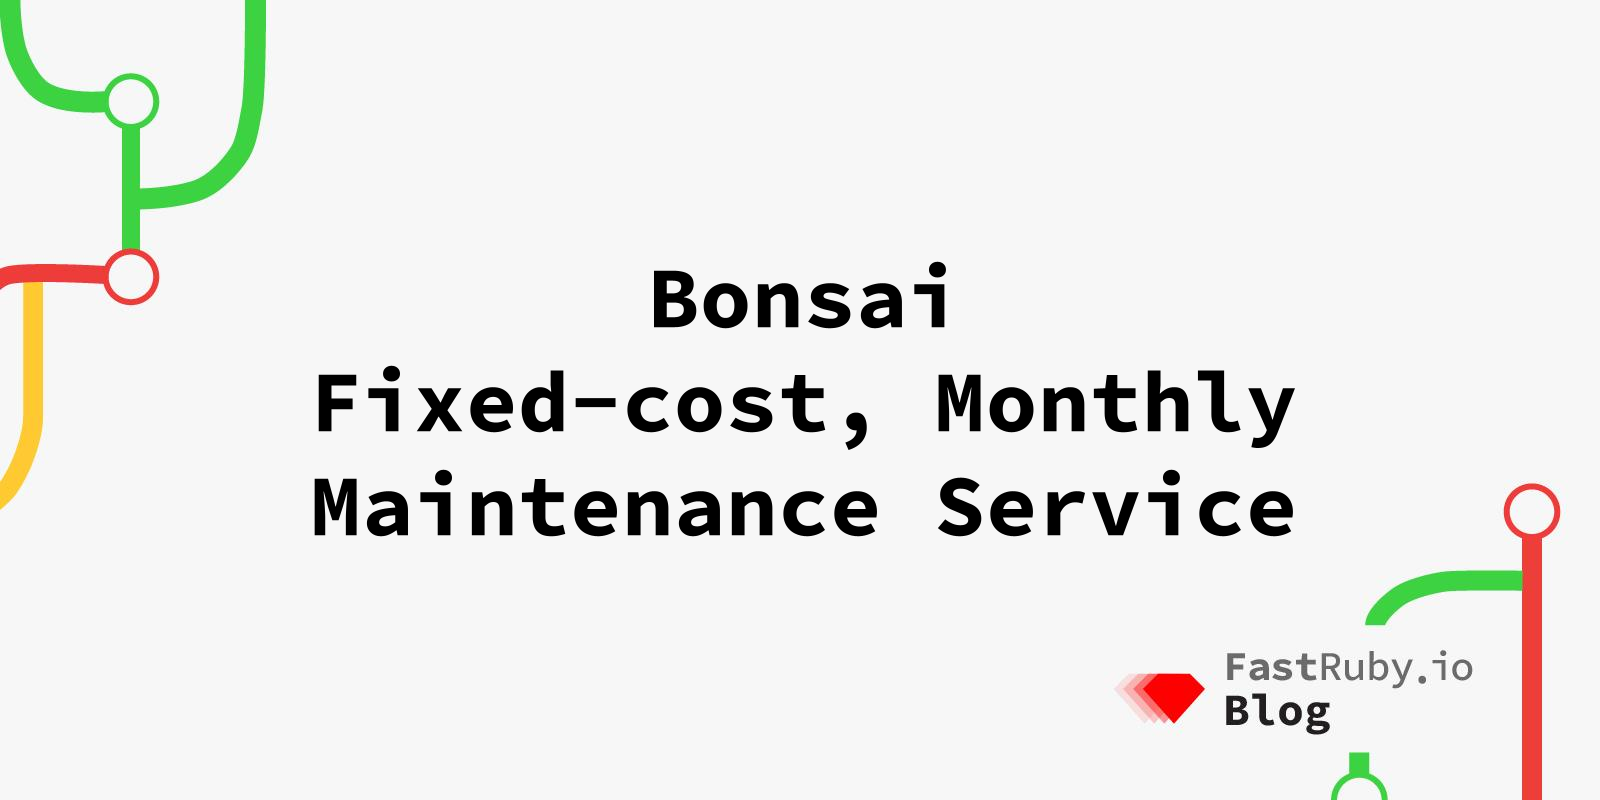 Bonsai - Fixed-cost, Monthly Maintenance Service